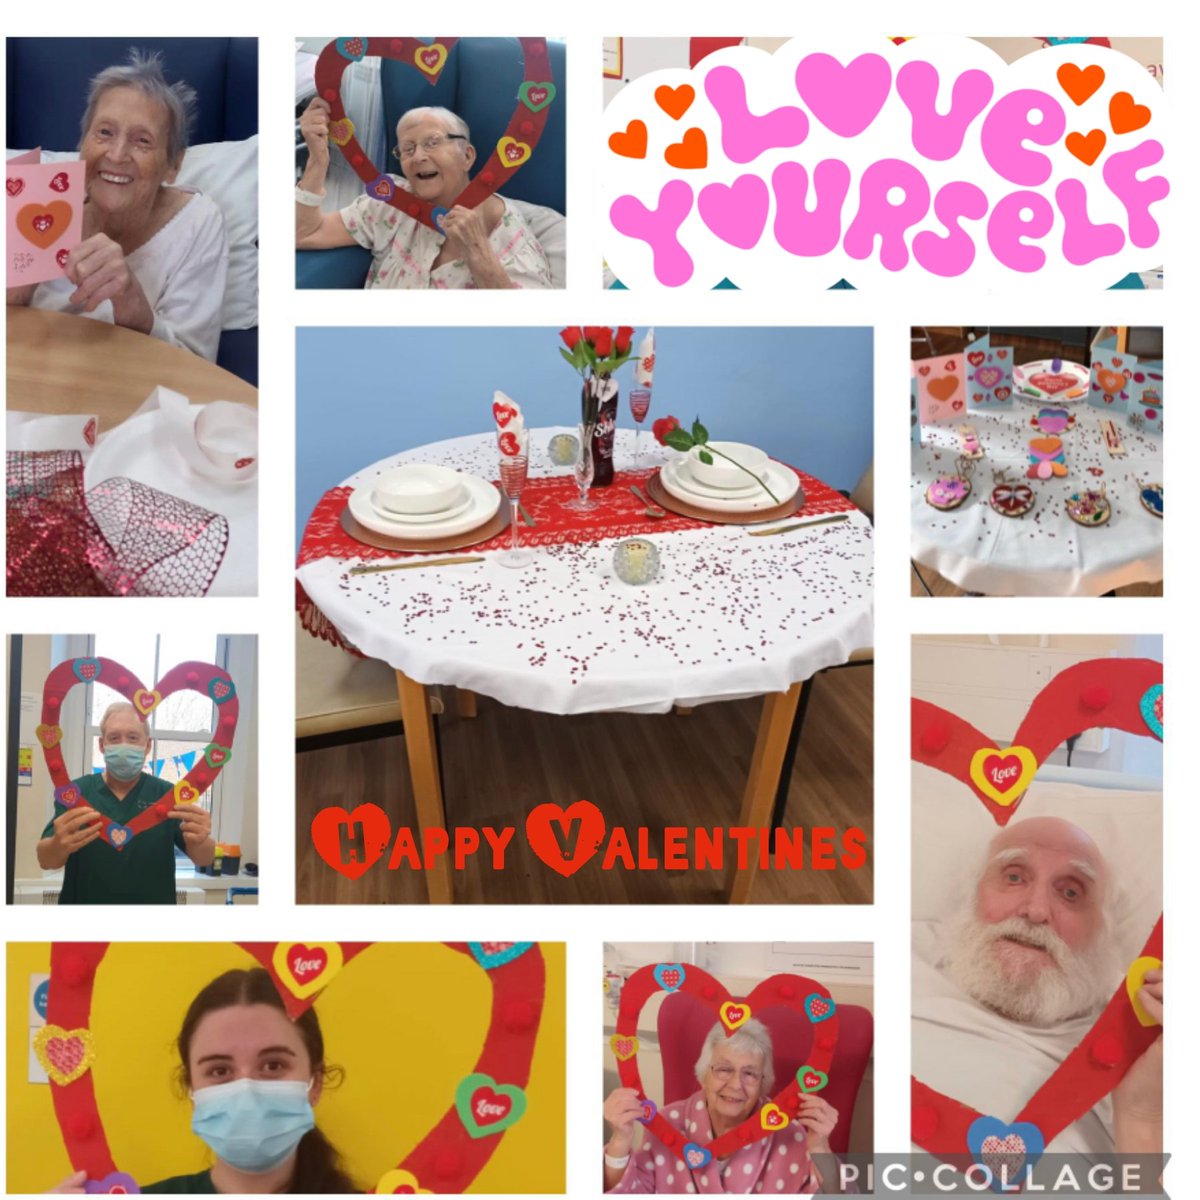 Love is all around us ❤️💜💙💚💛🧡 Wishing everyone a Happy Valentine's Day 🧡💛💚💙💜❤️ with love from @_TeamCounty_ & patients 😘 @_Hookie_ @Sianthom @webber_joanna @Kellydownes4 @AneurinBevanUHB @fleaflylaidler @StrangeTanya